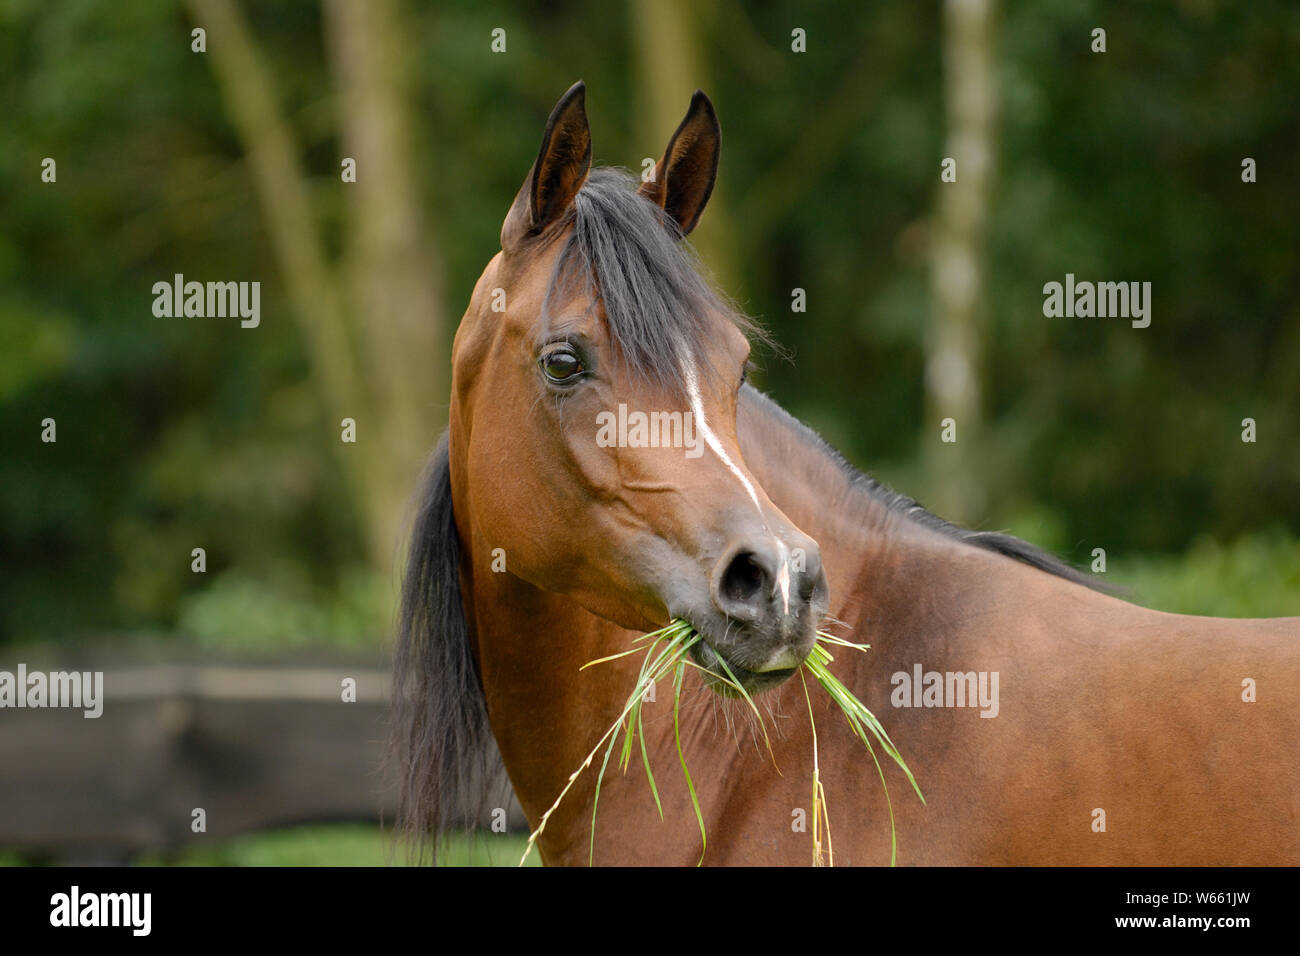 Arabian horse, brown mare with grass in mouth Stock Photo